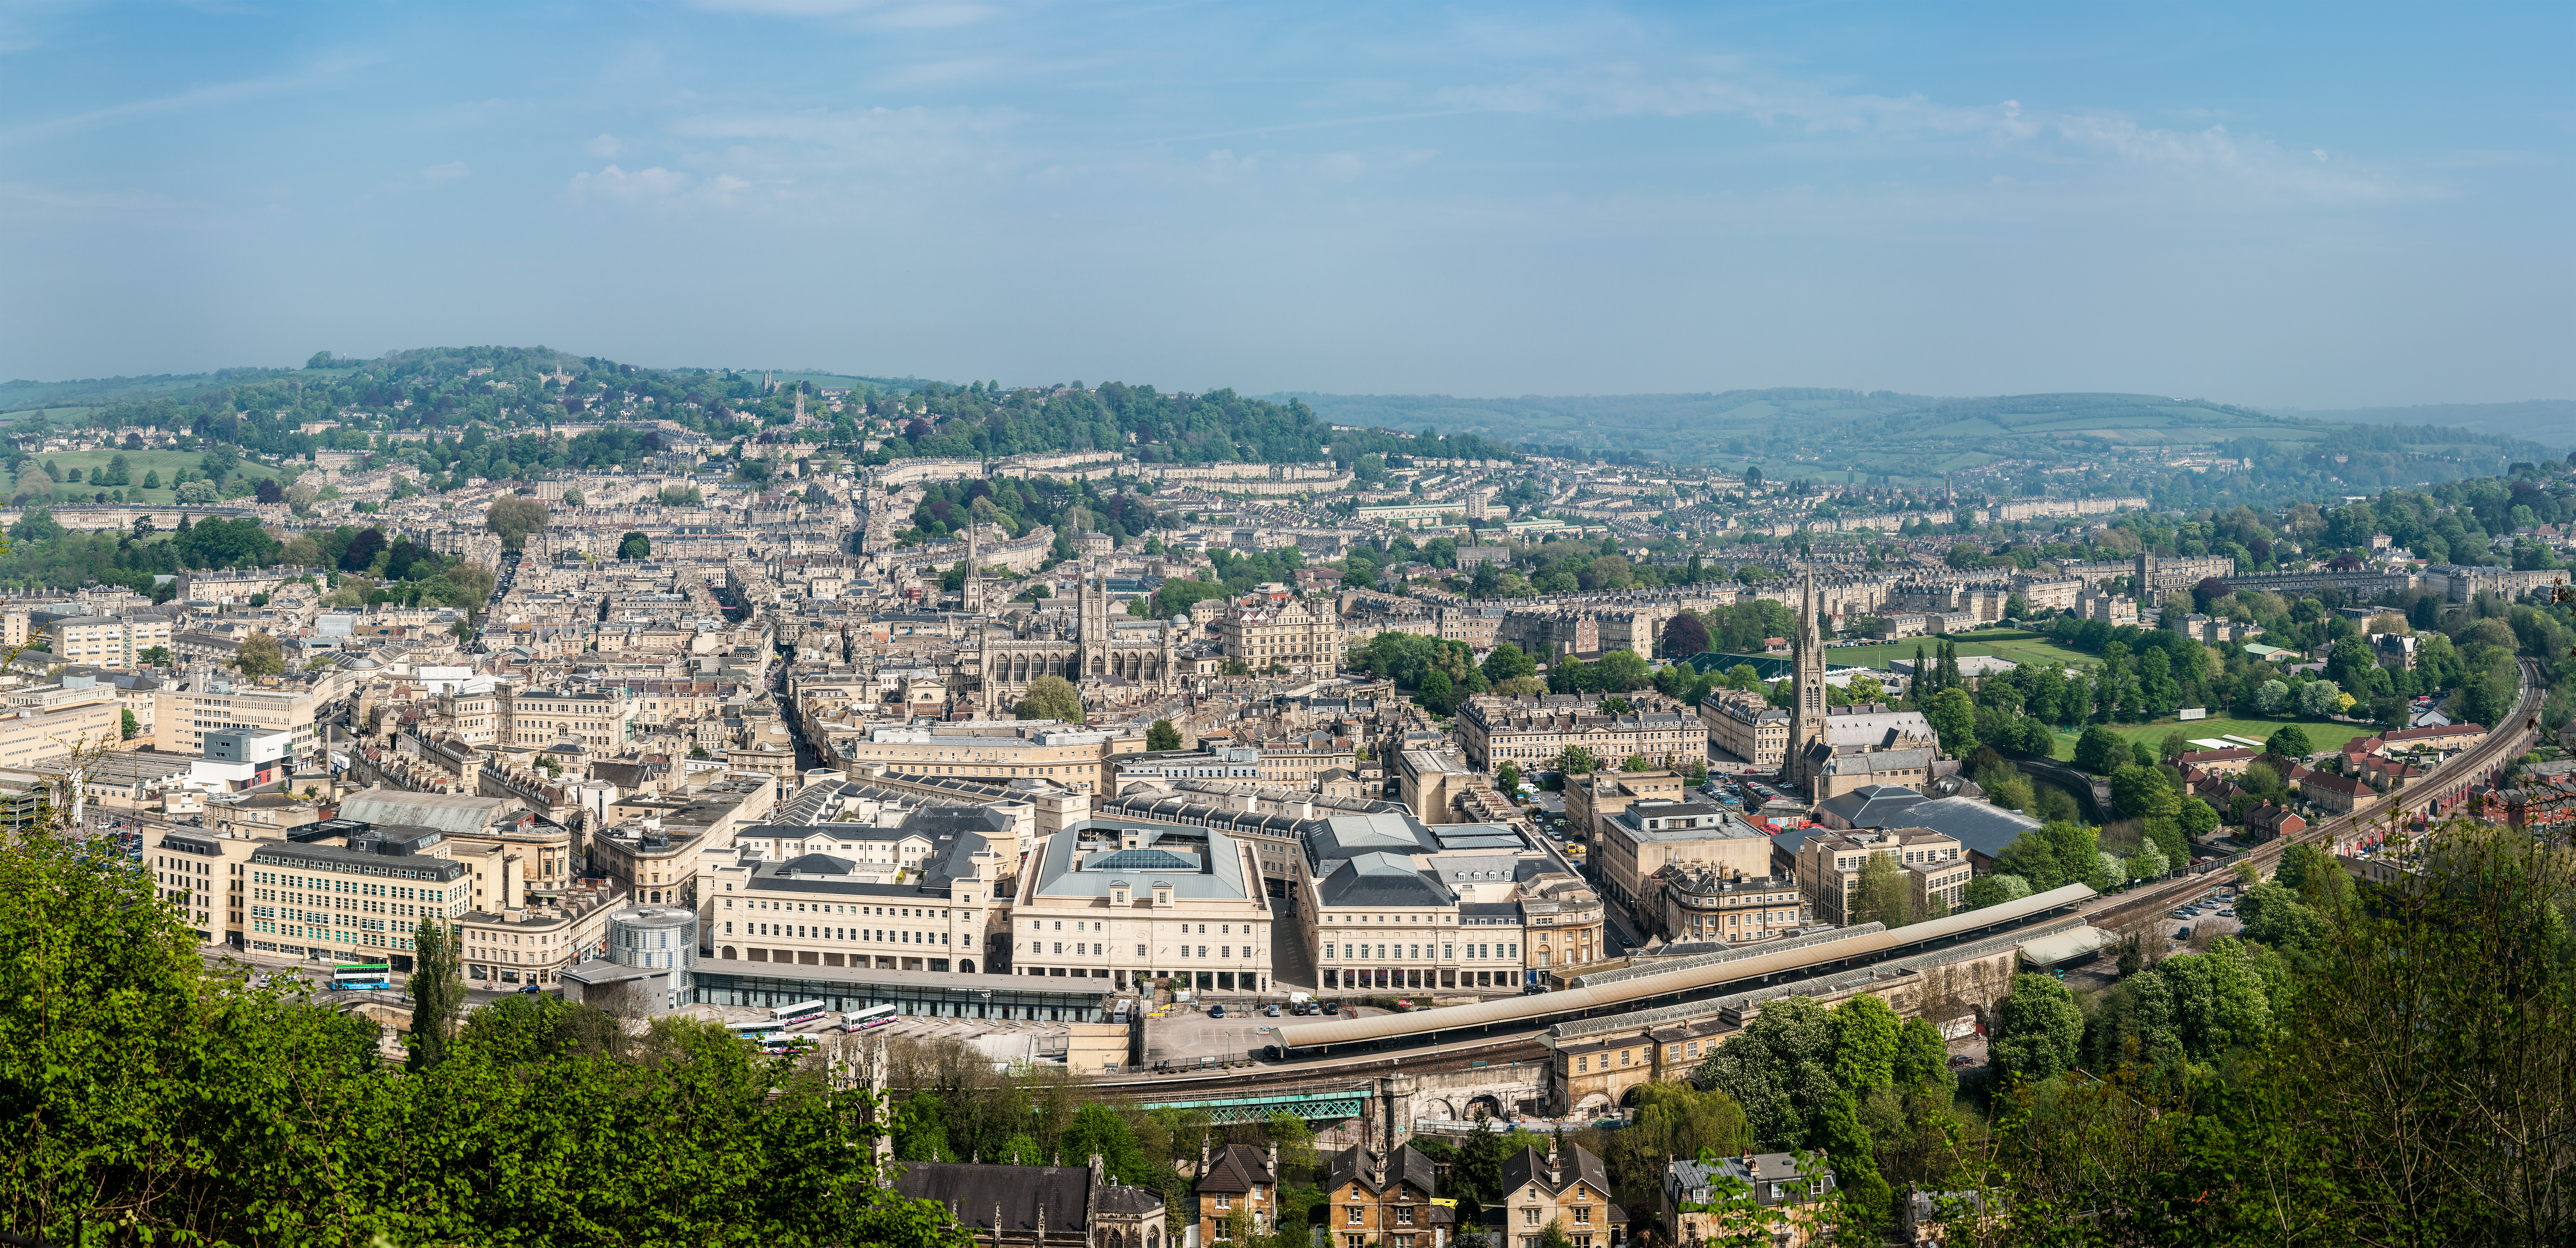 A view of the city center of Bath UK